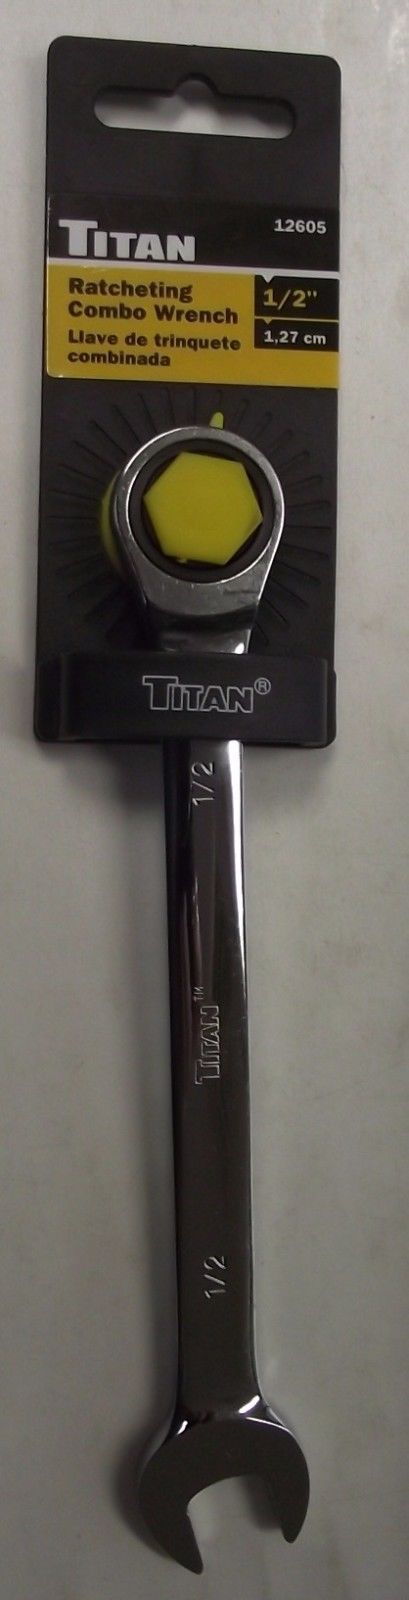 Titan 12605 1/2" Ratcheting Combo Wrench 72 Tooth